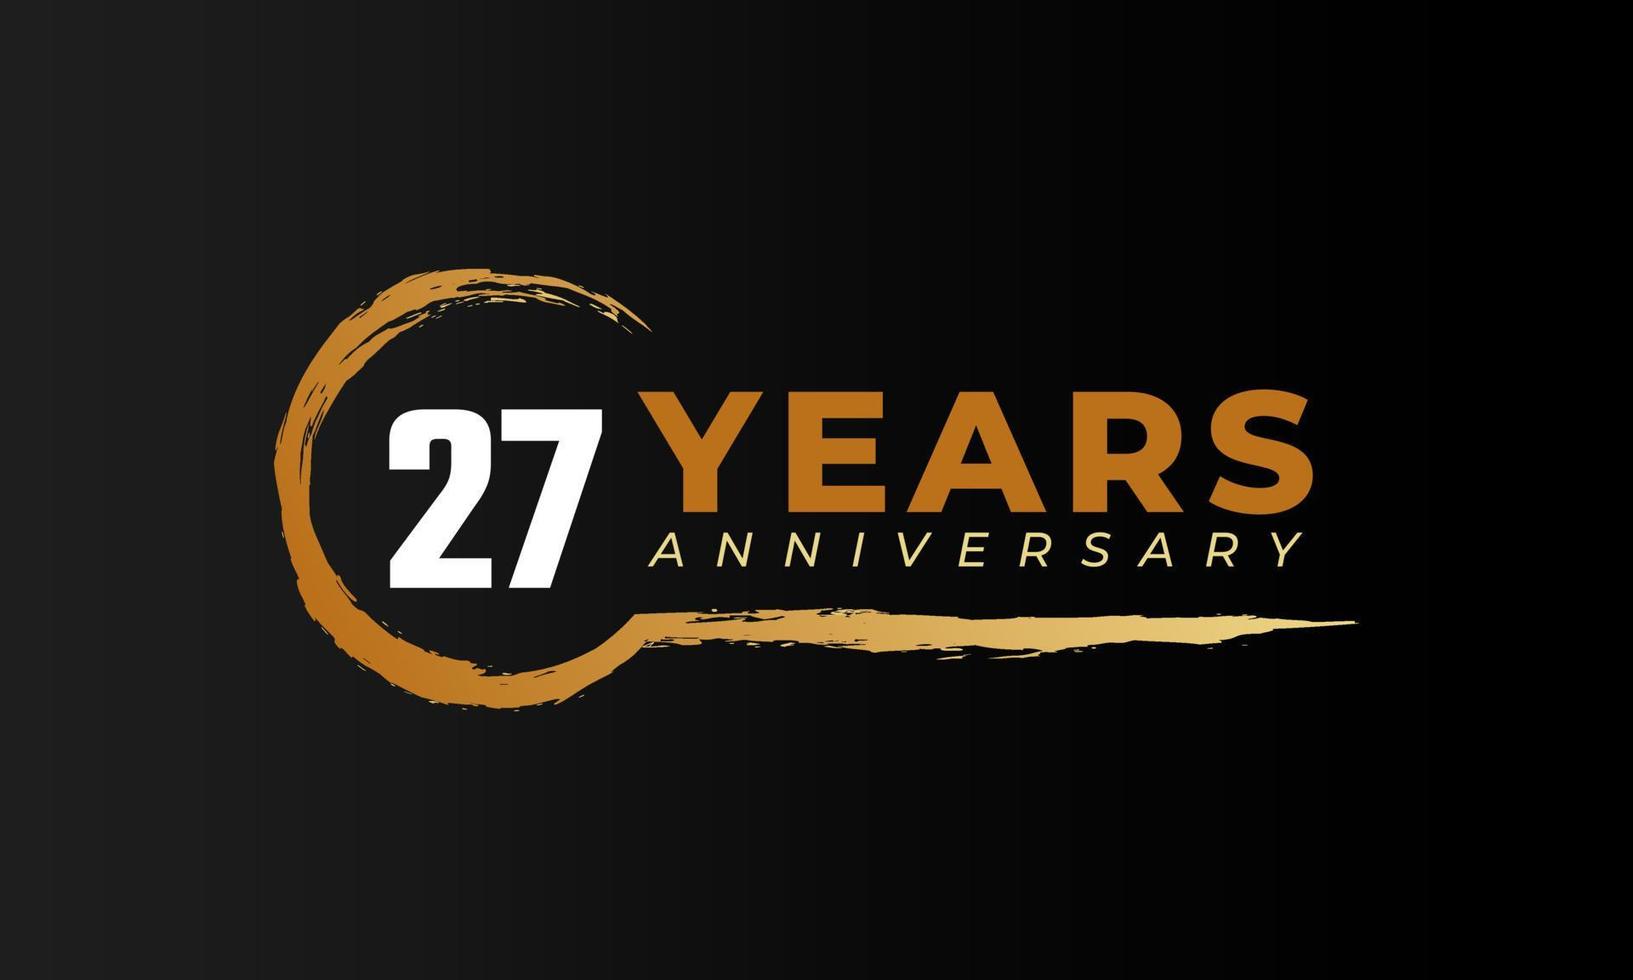 27 Year Anniversary Celebration with Circle Brush in Golden Color. Happy Anniversary Greeting Celebrates Event Isolated on Black Background vector